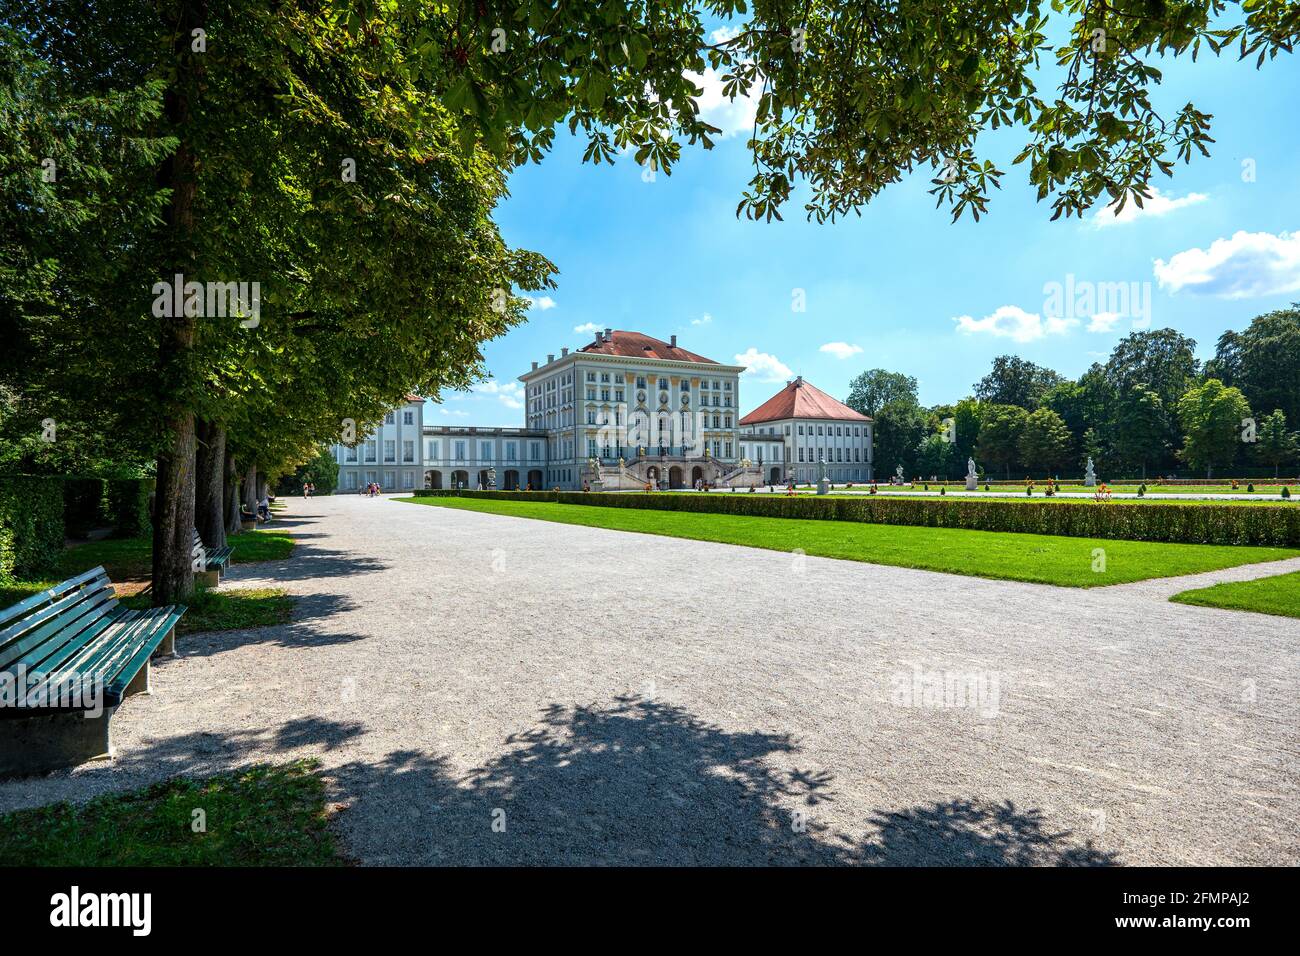 Munich. Germany, The Nymphenburg Palace seen from the park Stock Photo